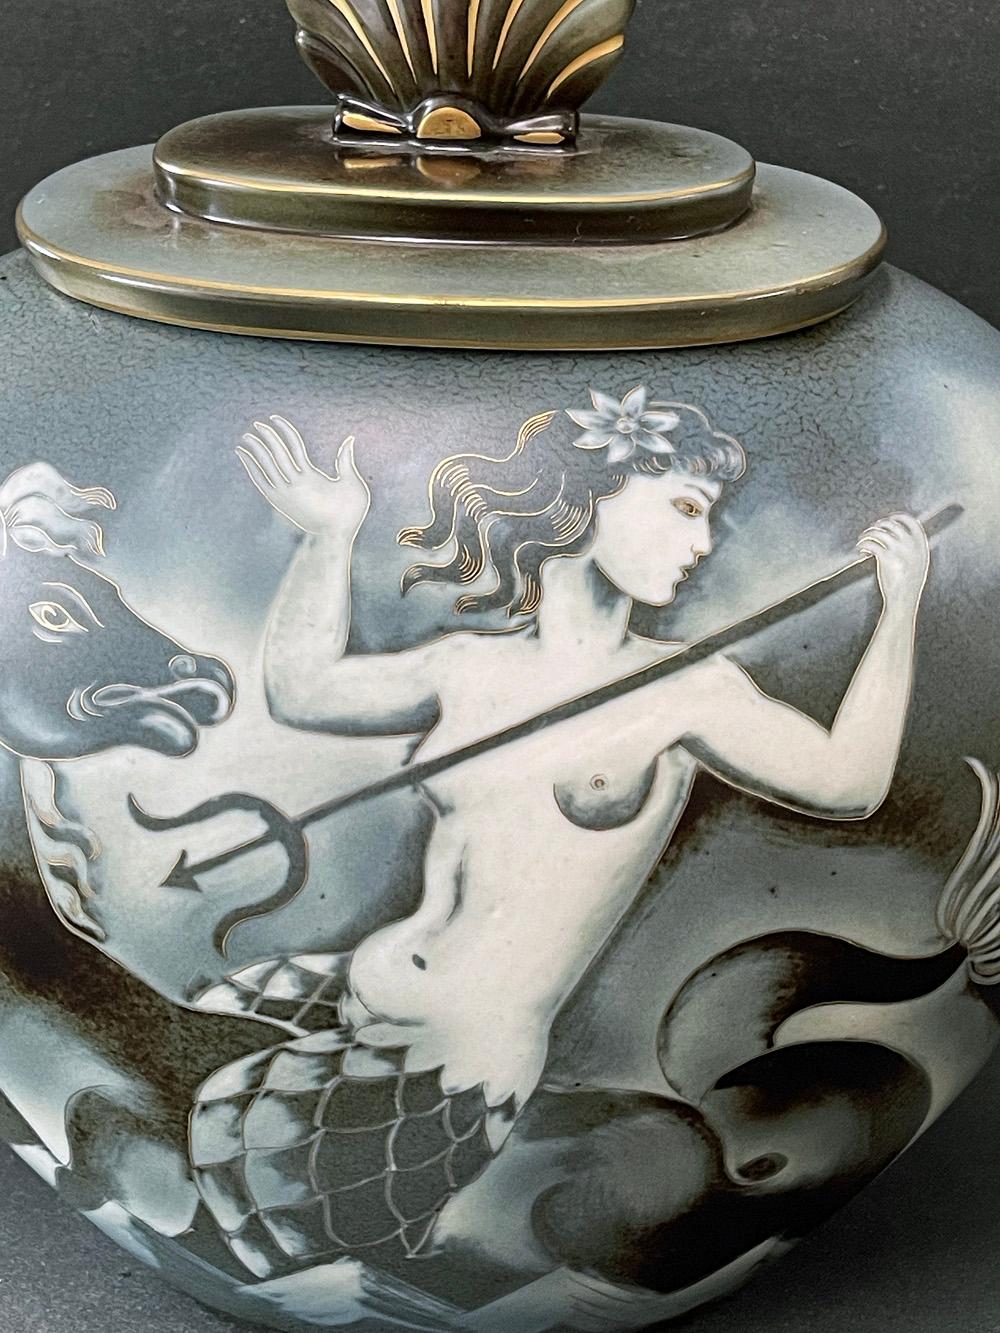 Large and exceptional, this lidded urn by Gunnar Nylund for the famed Rörstrand porcelain works in Sweden depicts two mermaids, one astride a hippocampus and the other riding a sea dragon, all in lovely shades of slate blue, charcoal and pale gray.